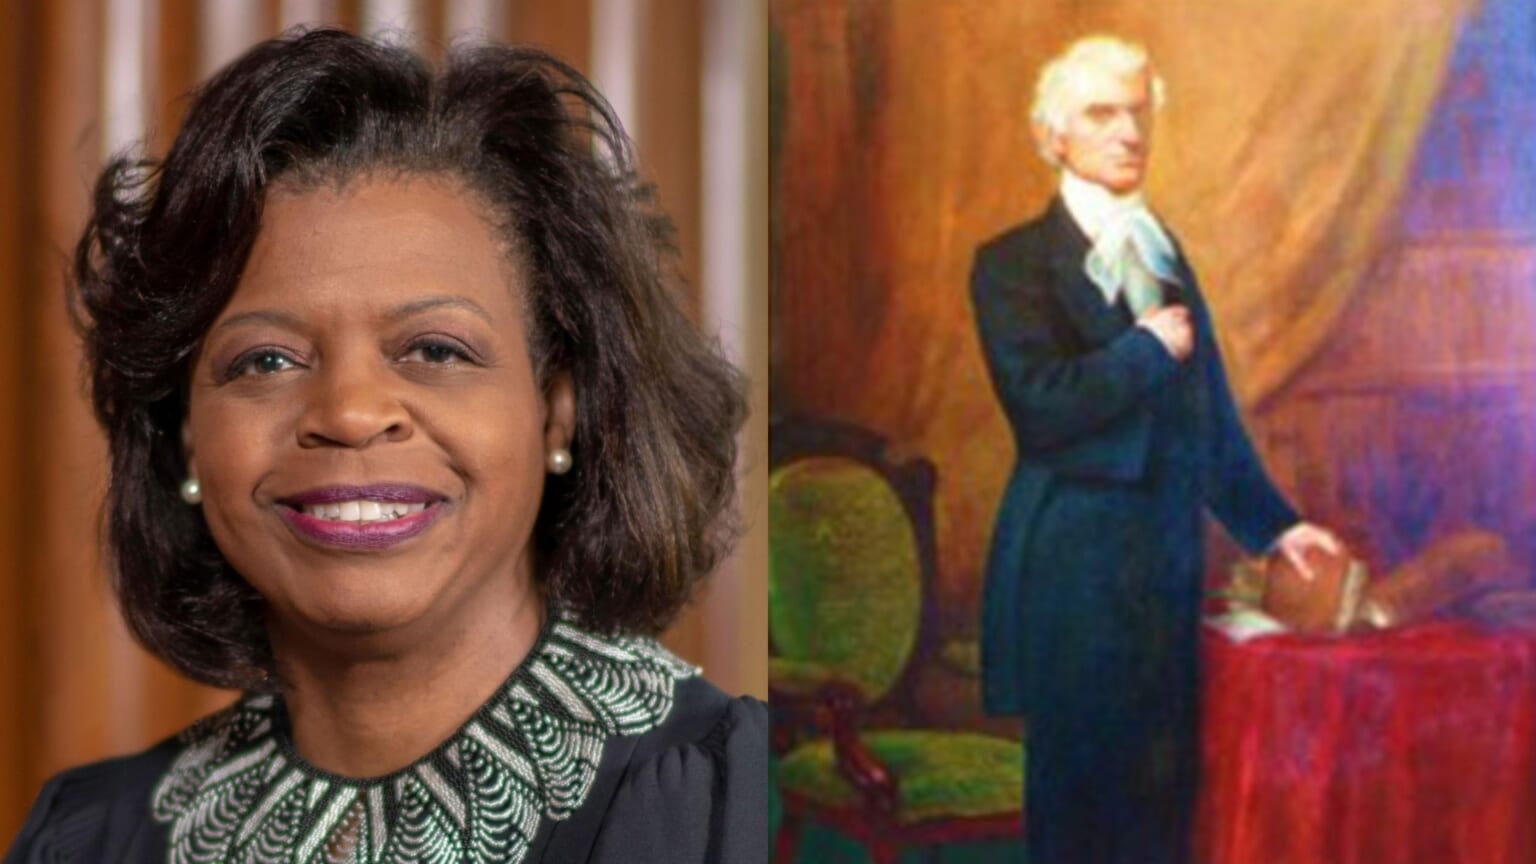 NC Supreme Court to remove portrait of chief justice who was a slave owner